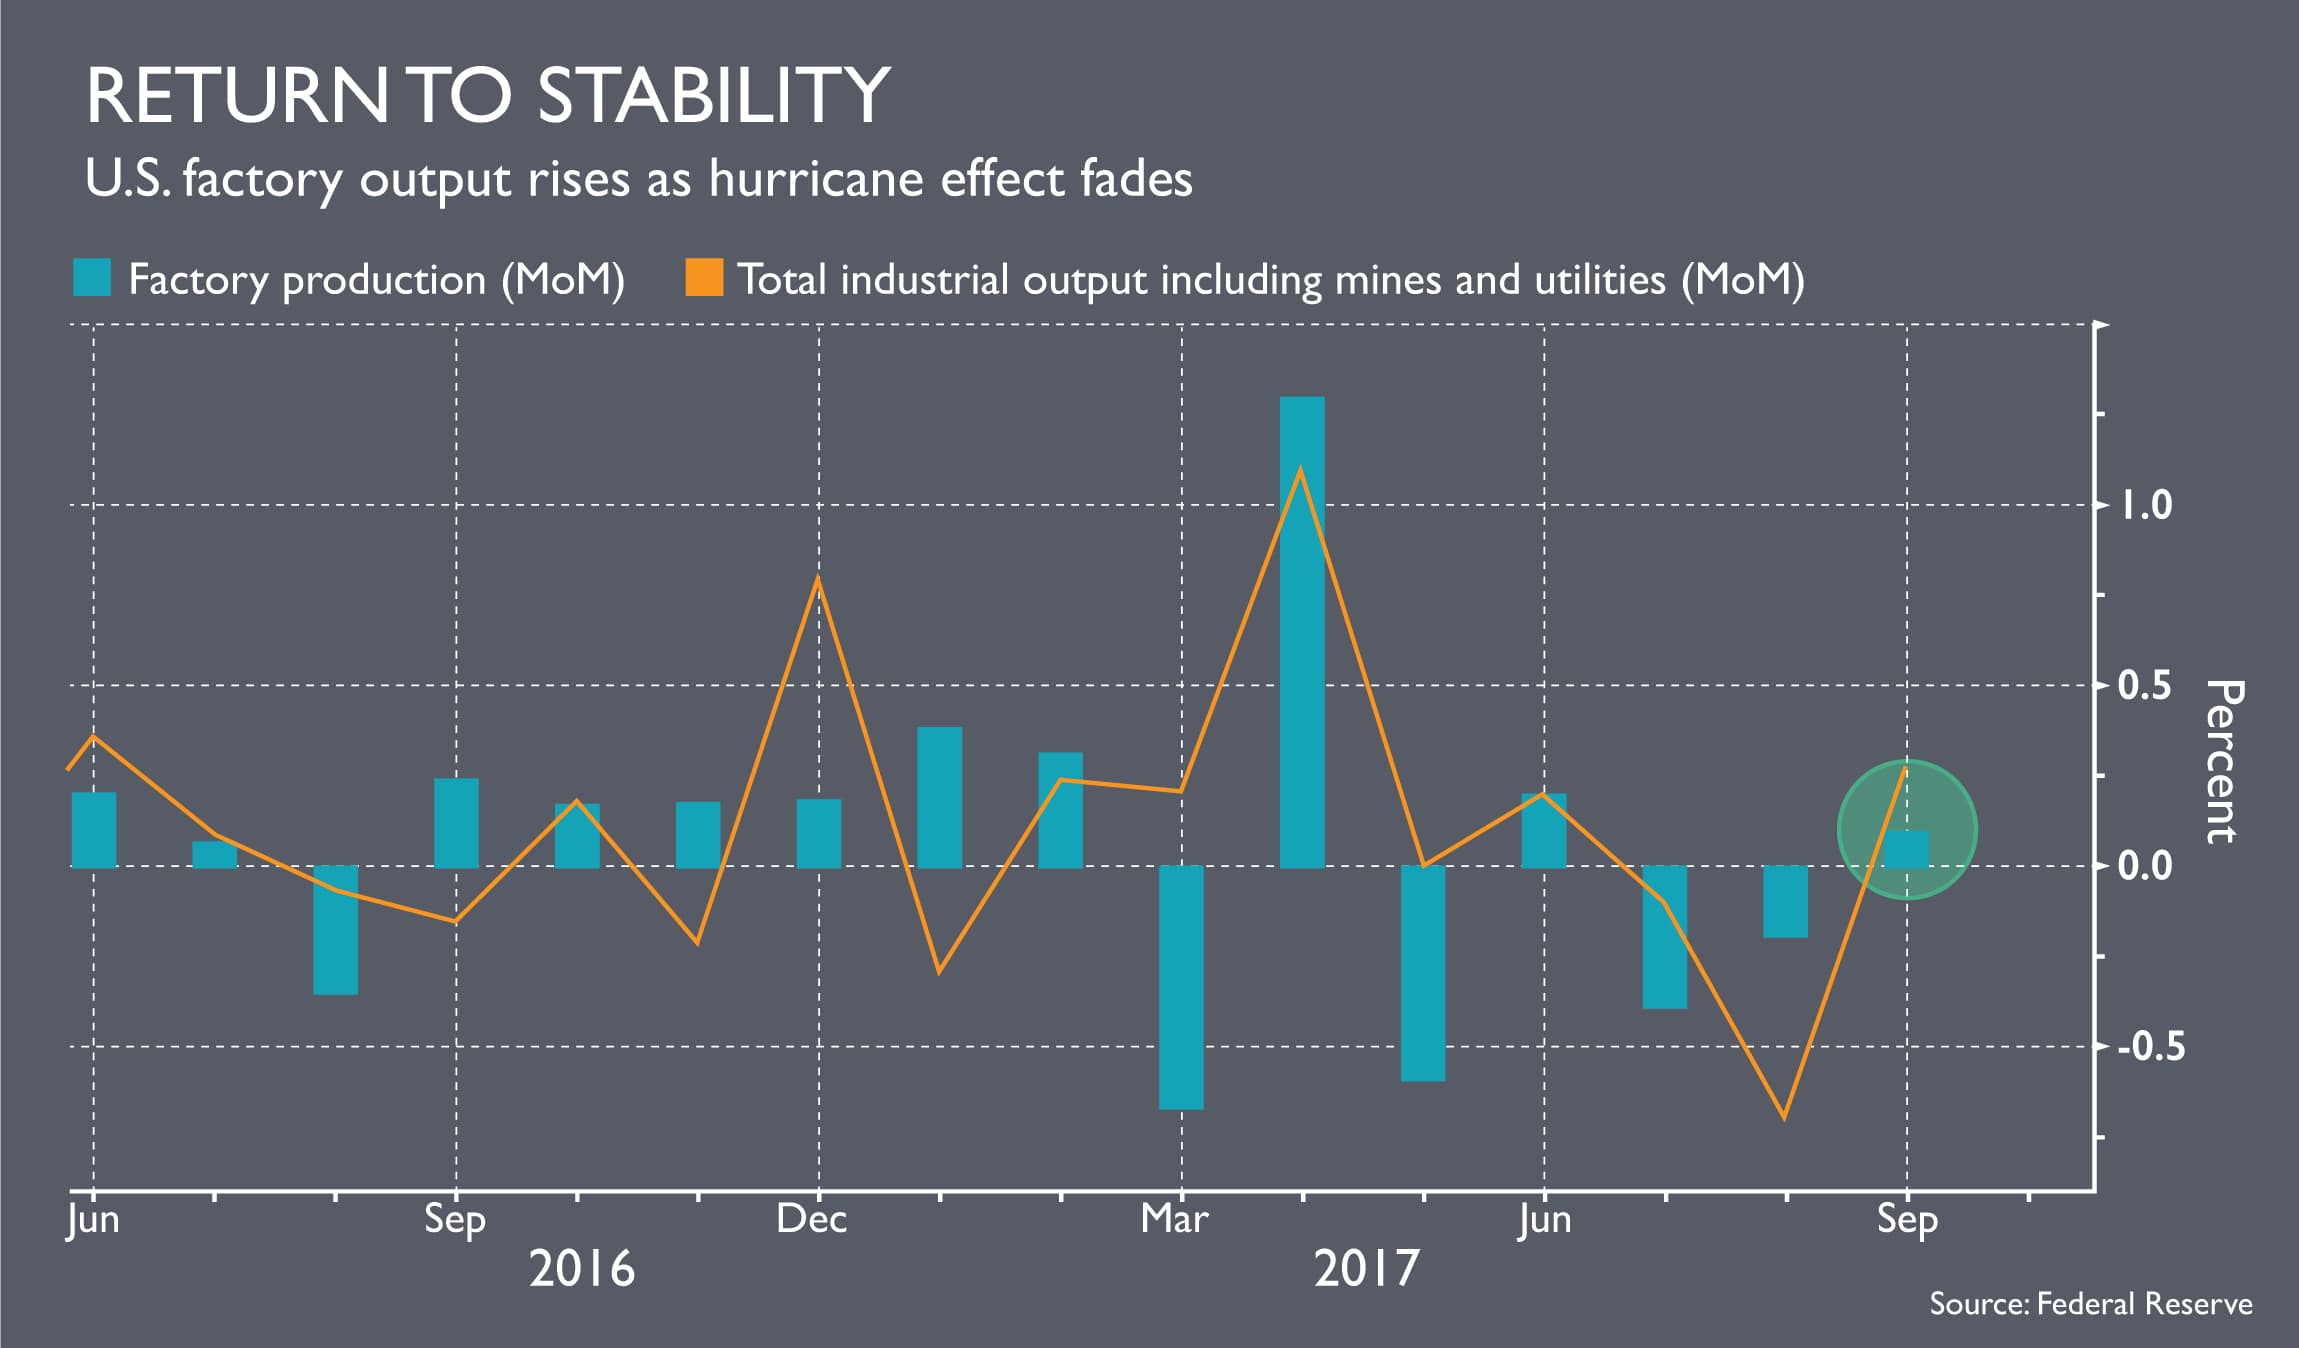 US Factory output returning to normal after hurricane